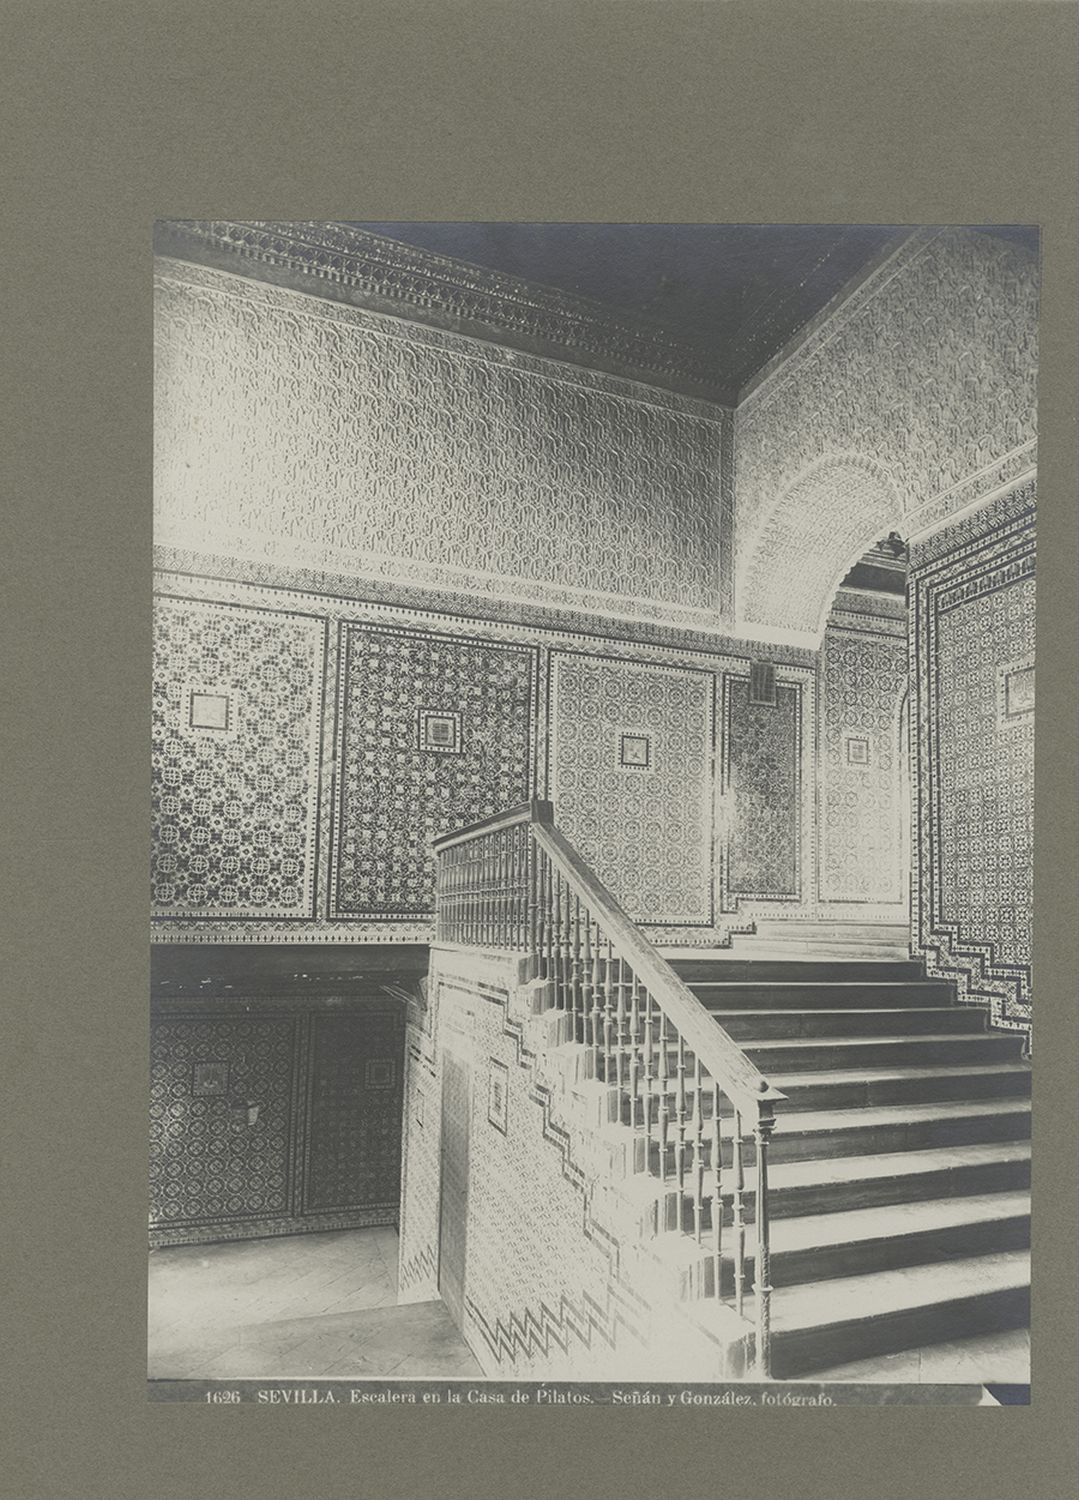 Casa de Pilatos - View of stairway with tilework and carved stucco ornament on walls.